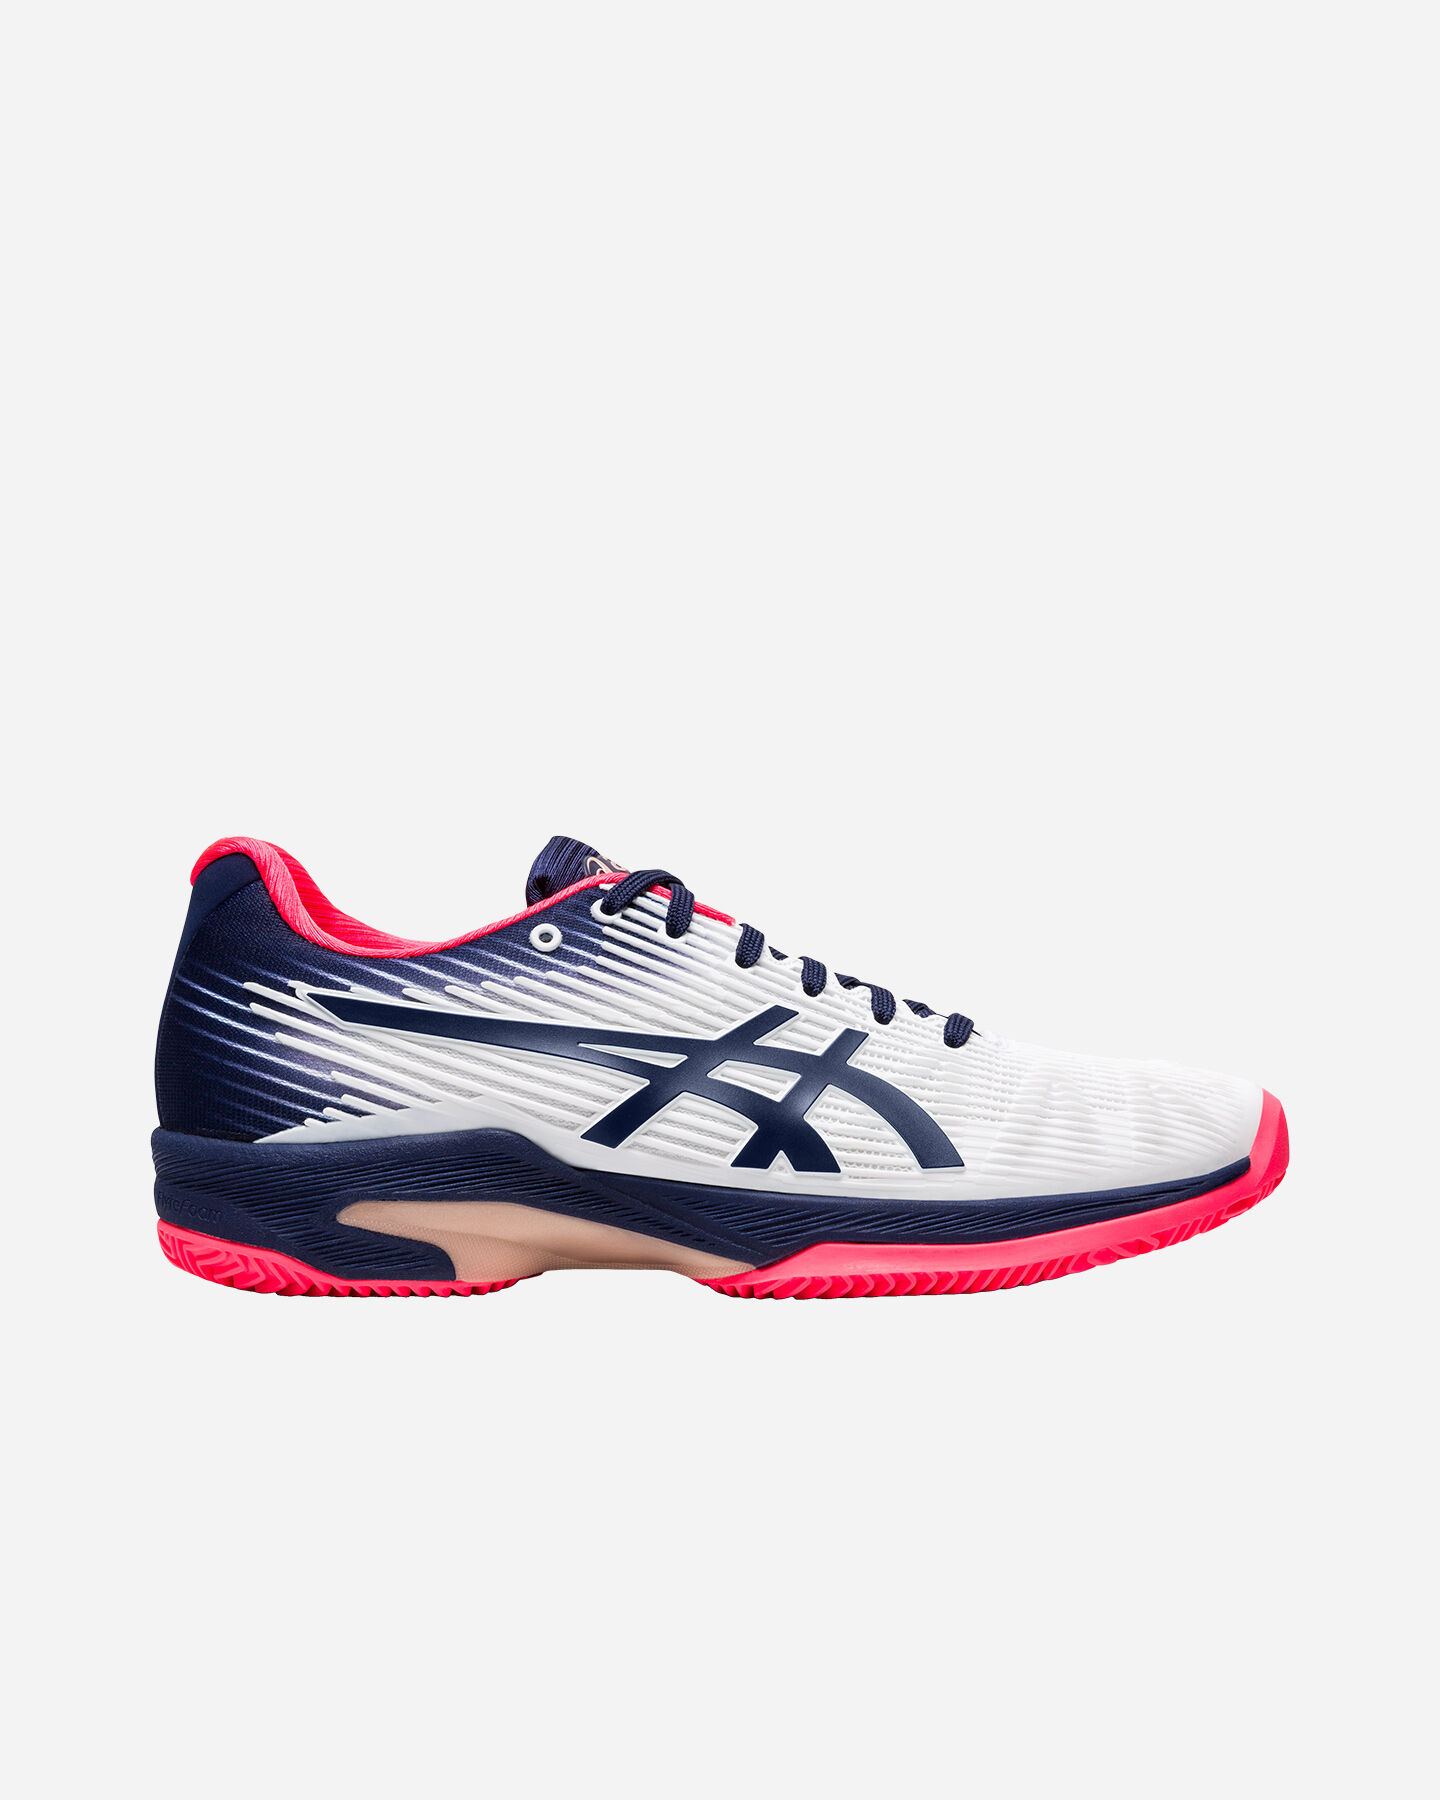  Scarpe tennis ASICS SOLUTION SPEED FF CLAY W S5159468|102|5 scatto 0